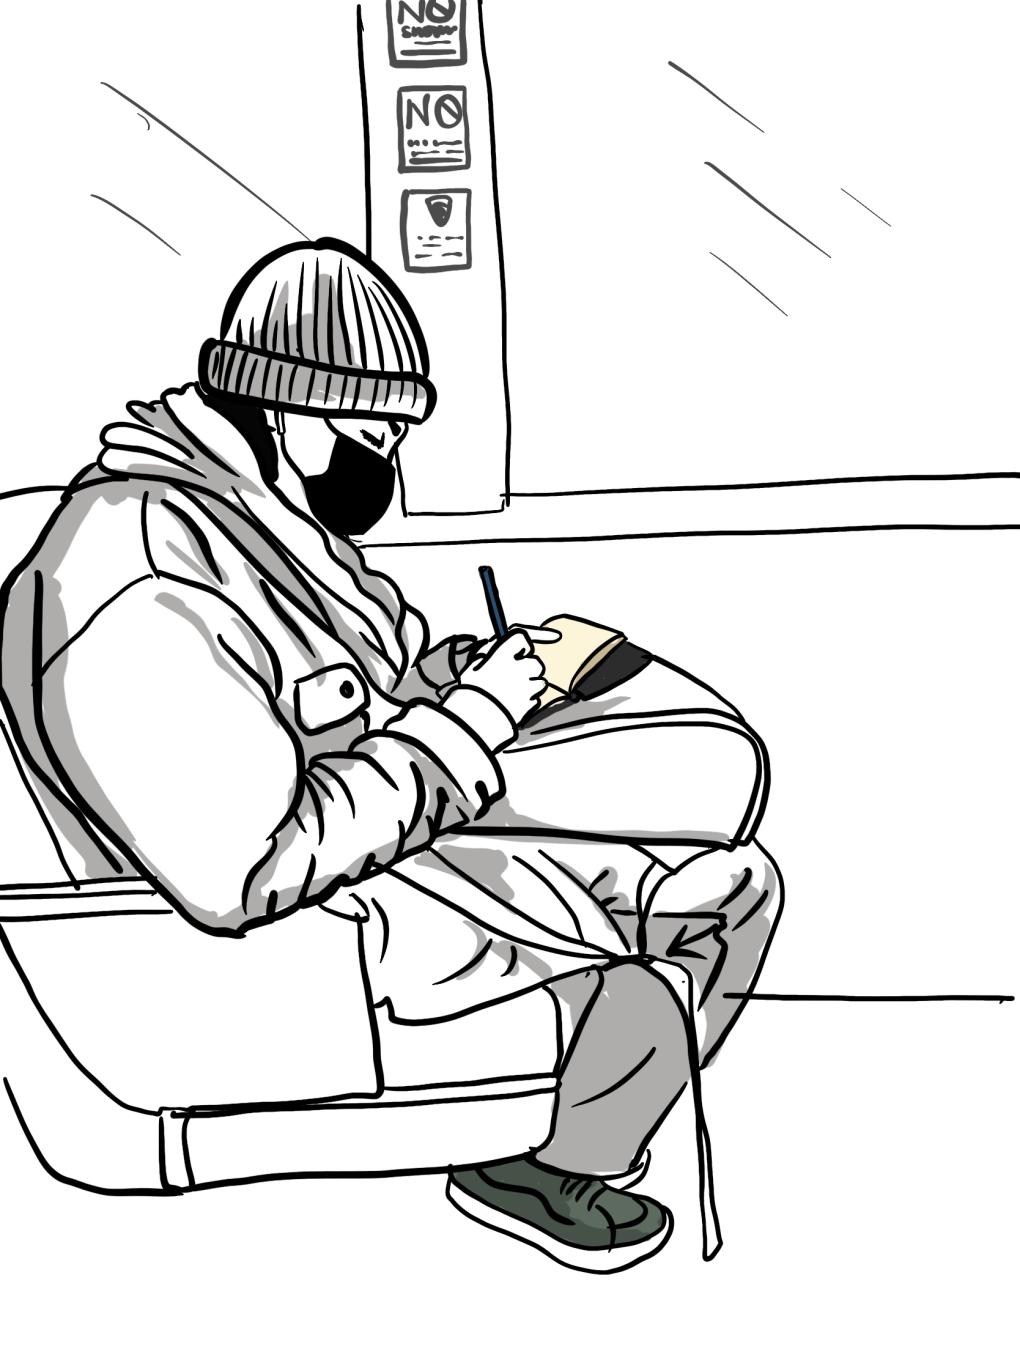 A line drawing of a person sitting on a BART train